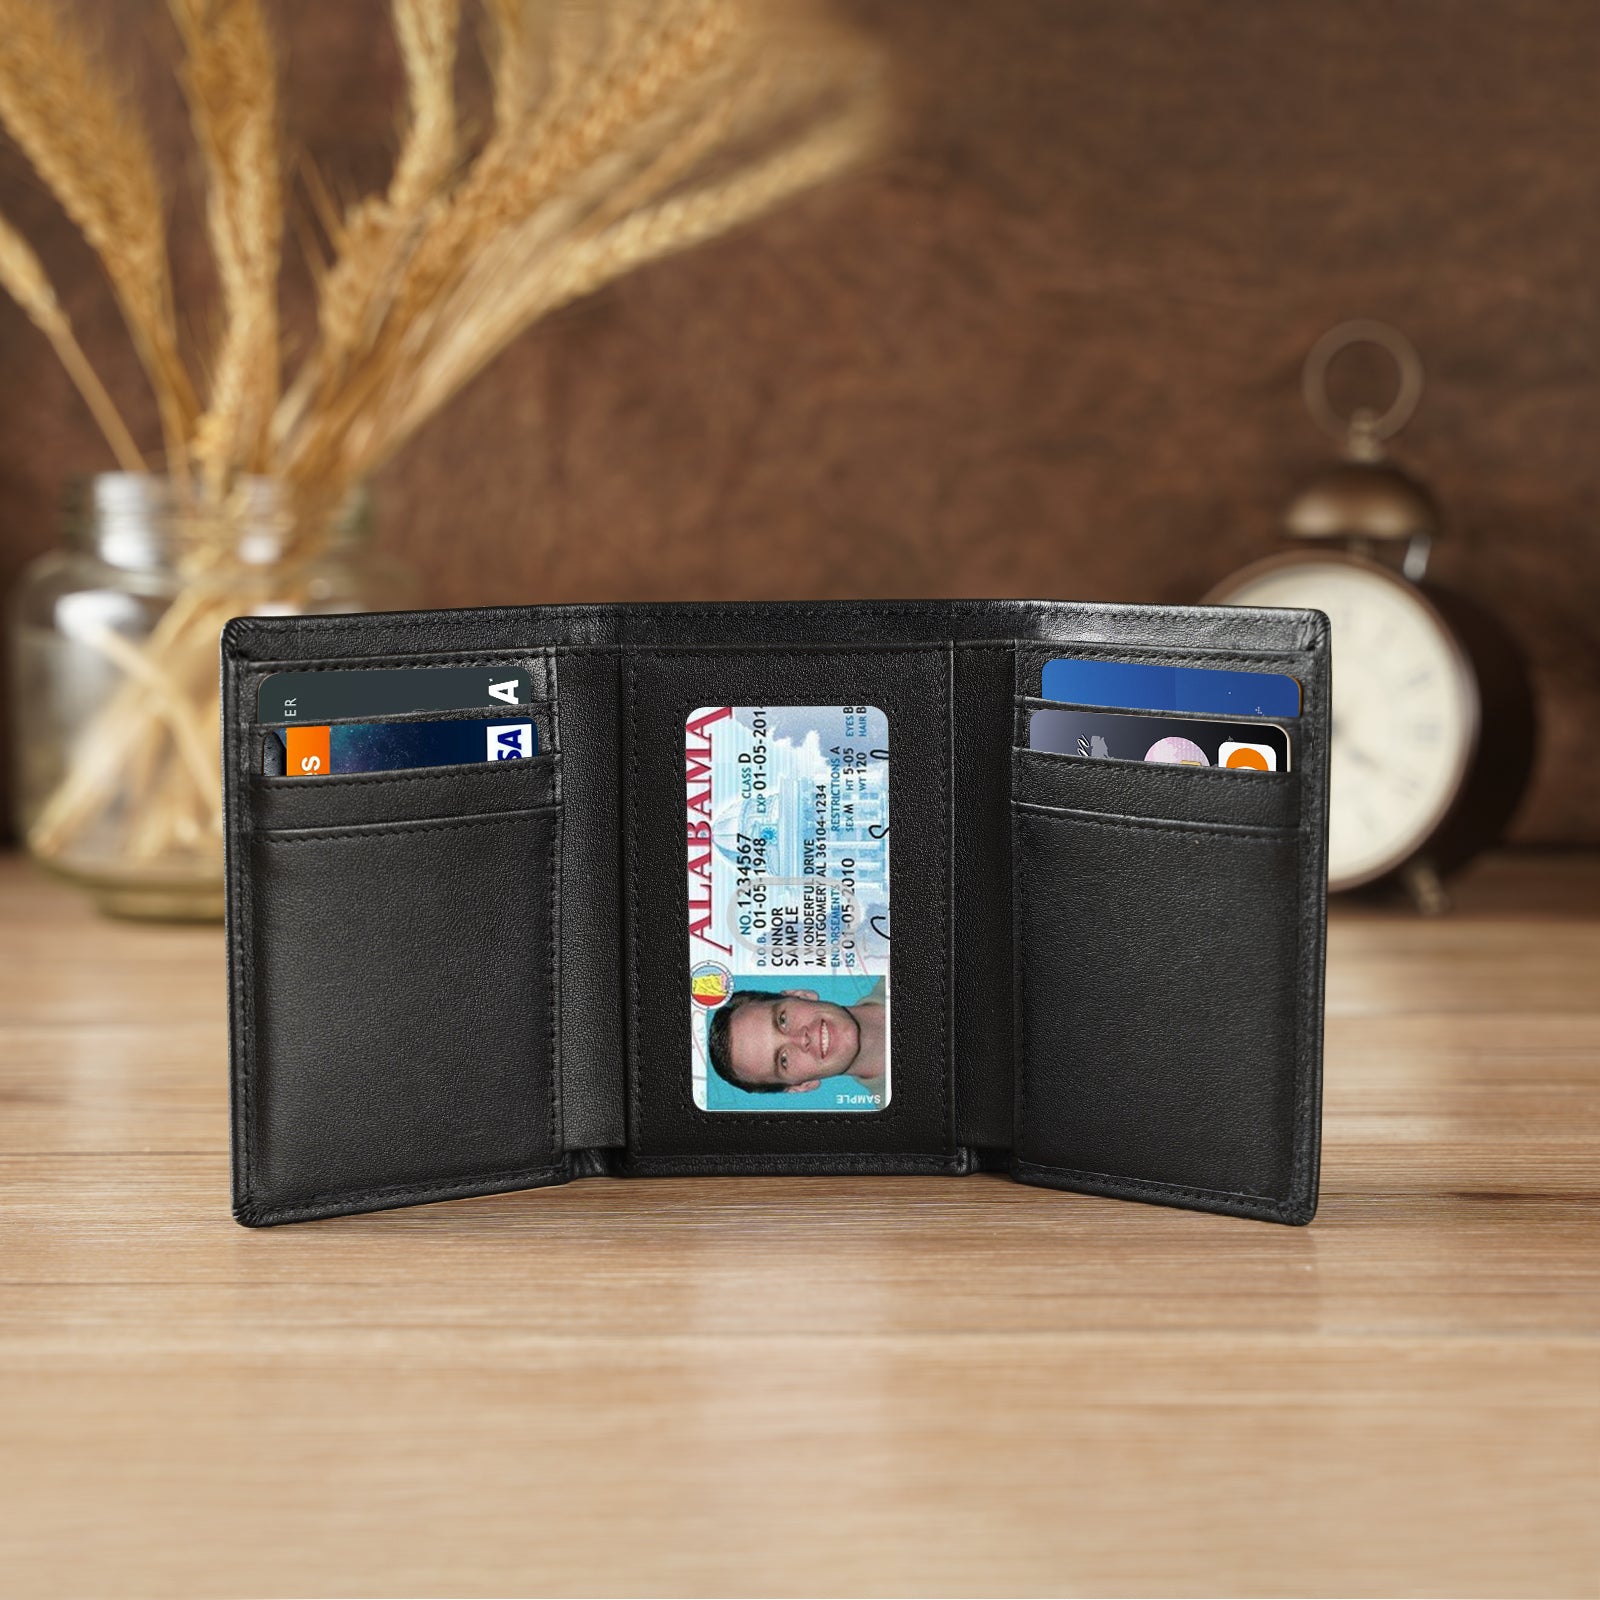 Small Men's Leather Trifold Wallet - 12 Card Slots - RFID Blocking